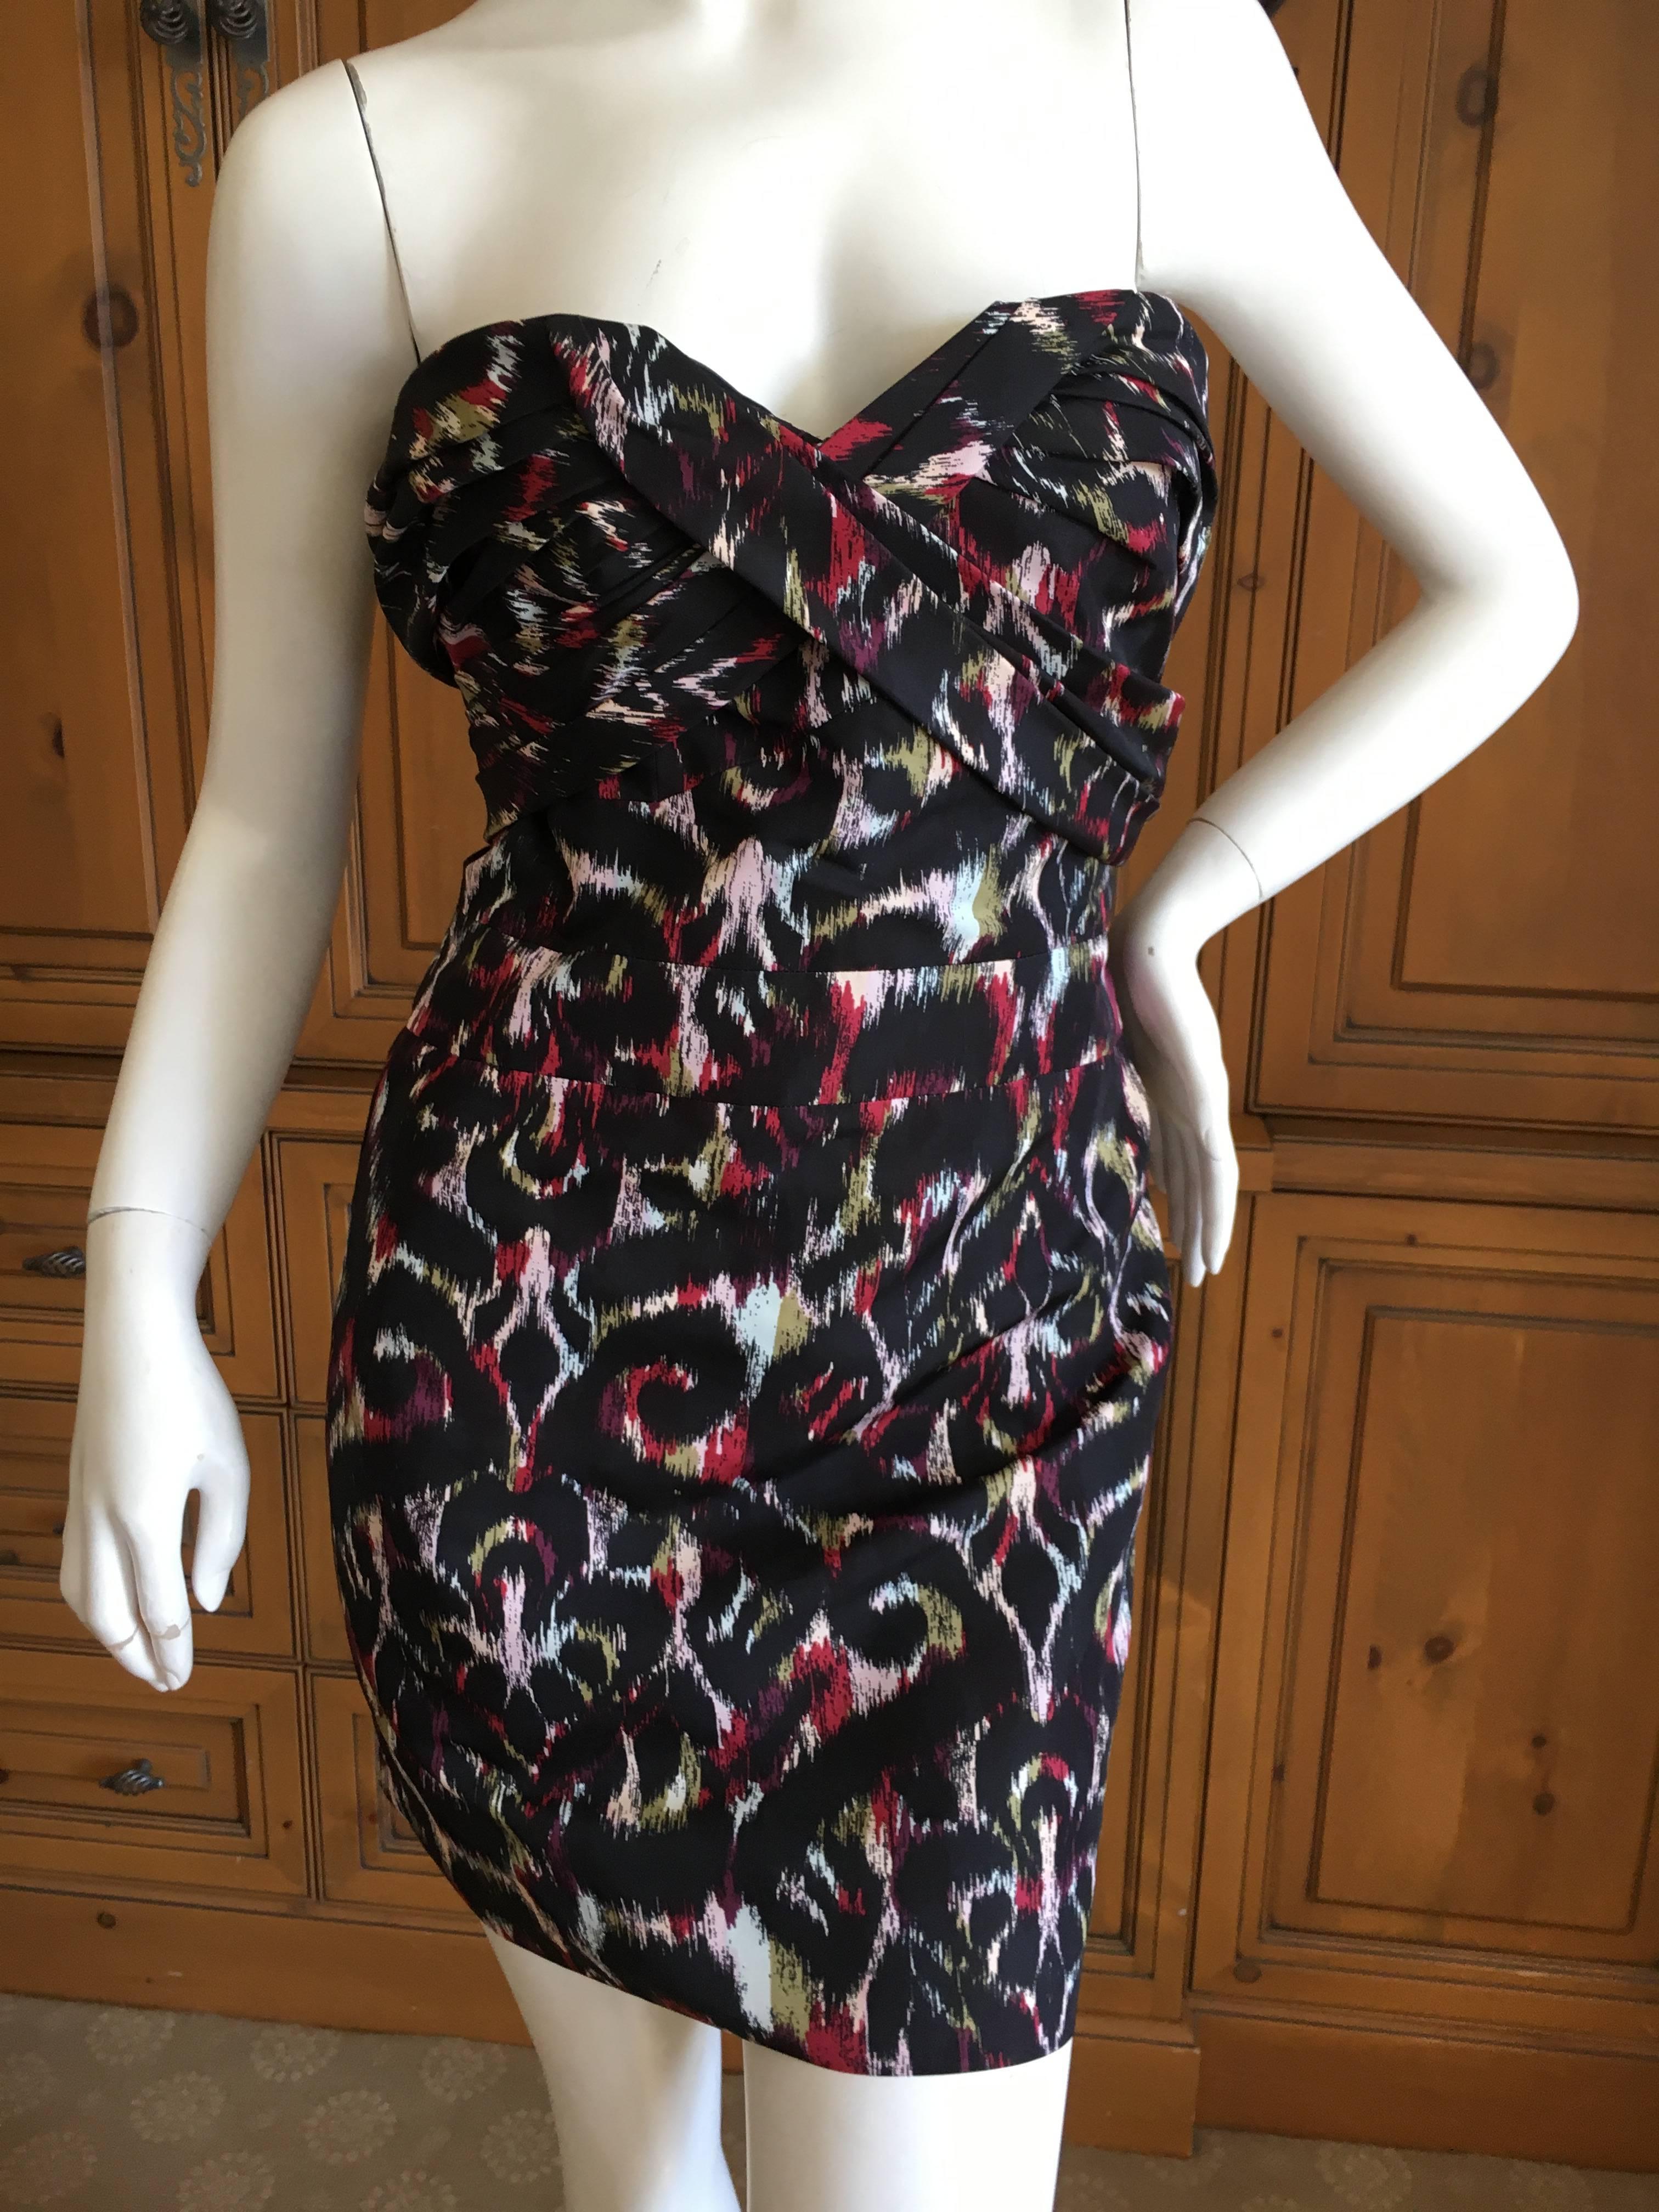 Christian Dior by John Galliano Tribal Print Strapless Mini Dress w Inner Corset.
Size Small.
Details to follow